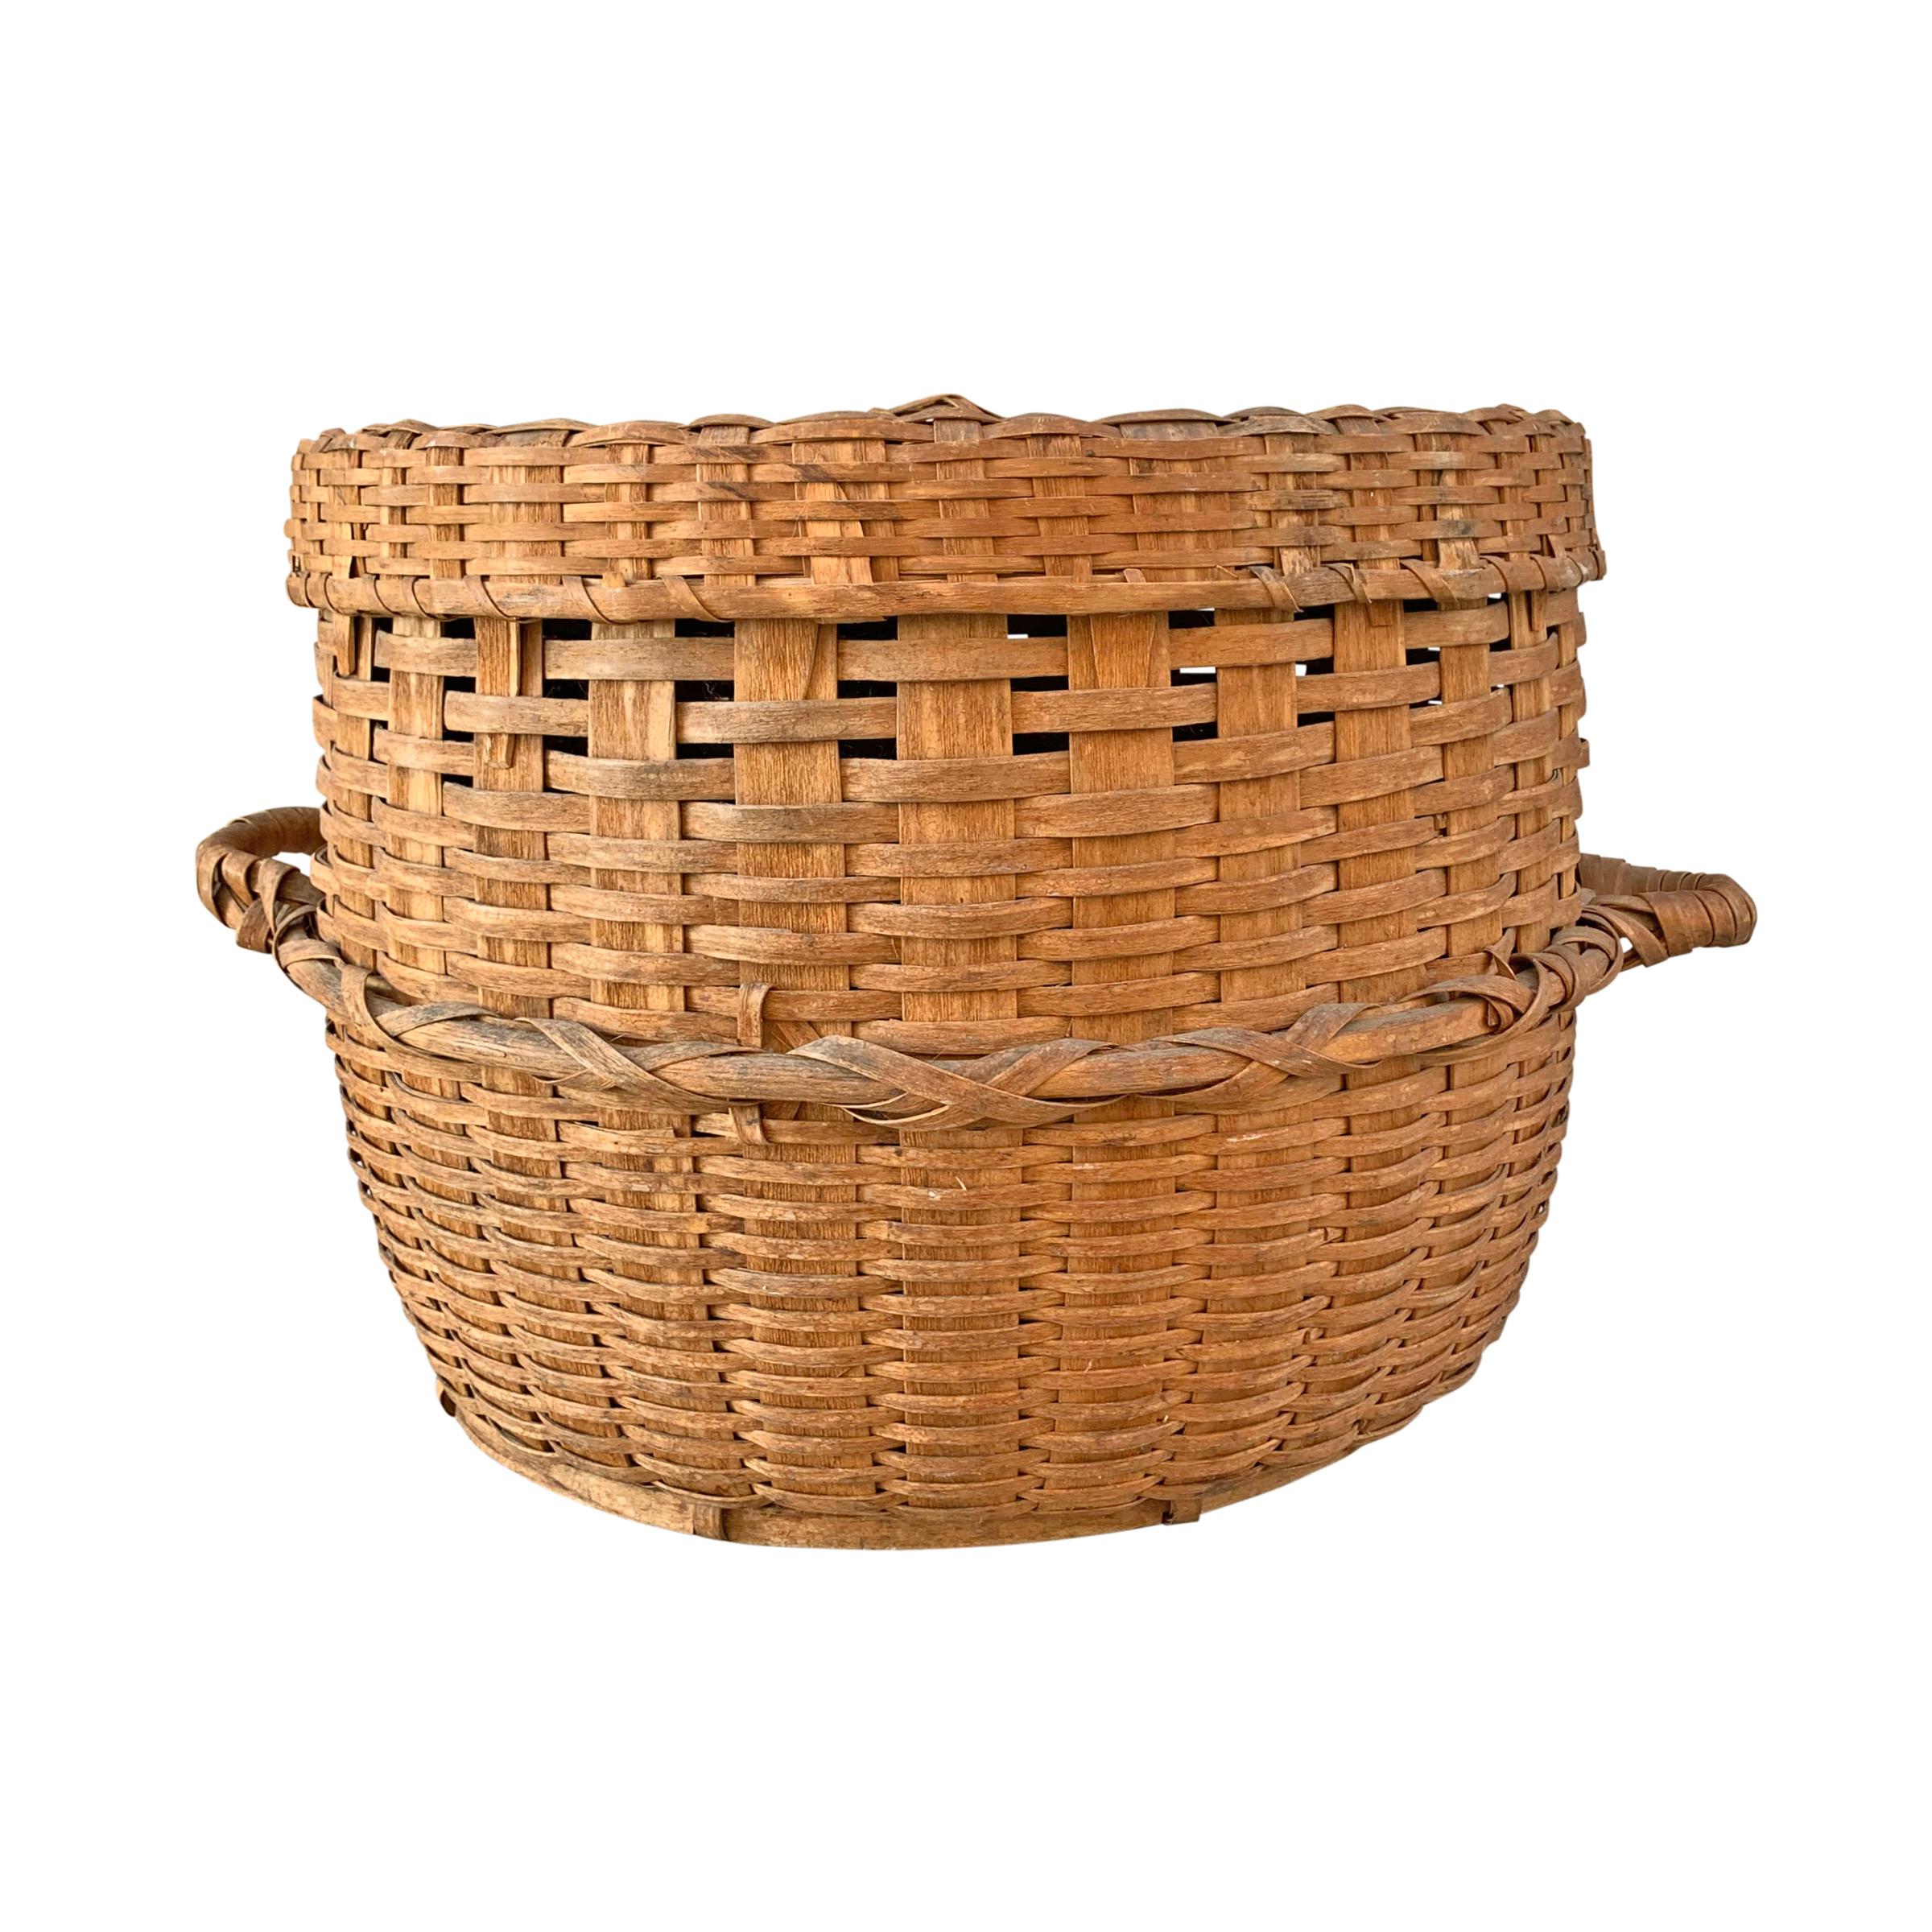 A monumental 19th century American ash and oak splint feather basket of fantastic size with two banded handles, a wide bentwood rib running around the belly of the basket, and a wooden ring base. Every farm in American had a feather basket where